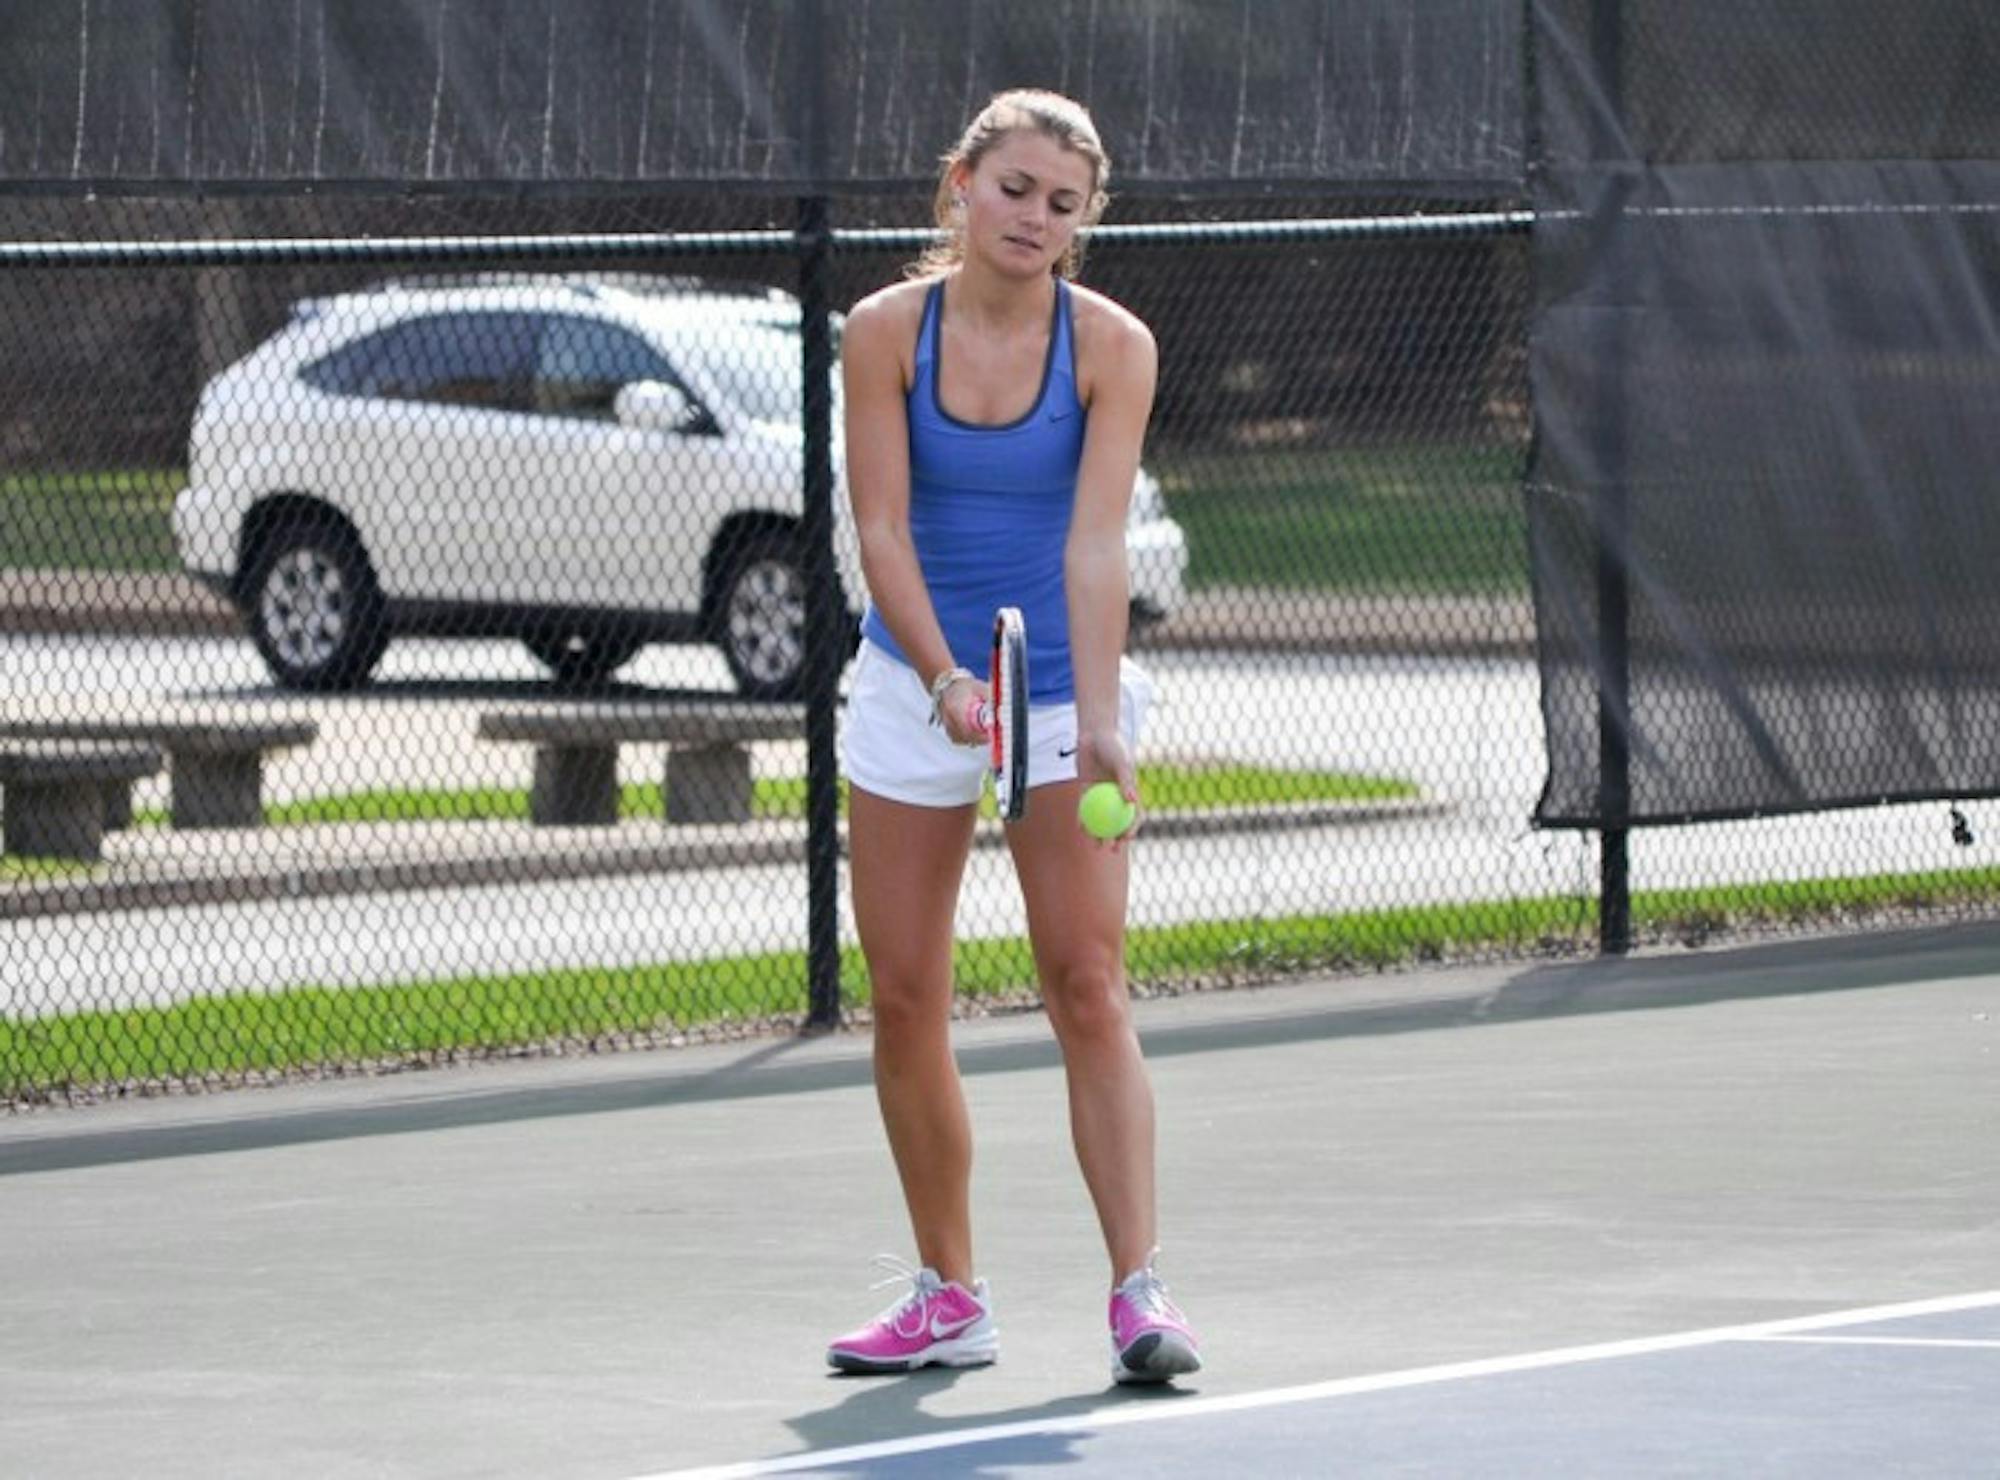 Senior captain Kayle Sexton prepares to serve in a match against Hope on April 17. Sexton won her match Wednesday 6-1, 6-2.